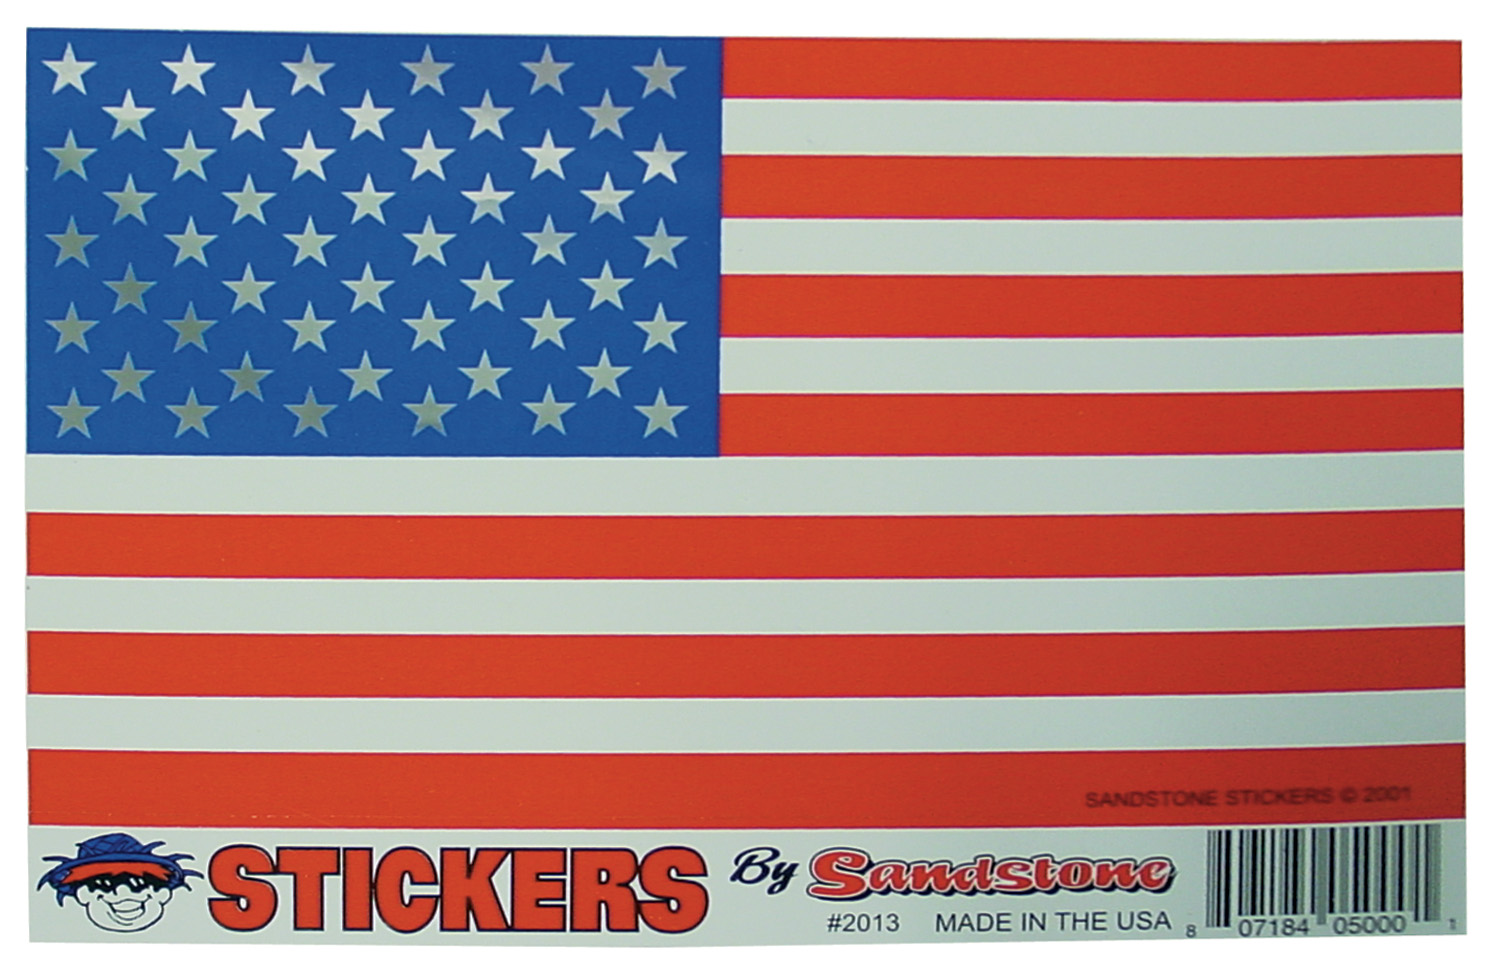 SANDSTONE - 6-1/4" X 3-5/8" AMERICAN FLAG FOIL STICKER. RED, WHITE, BLUE WITH SILVER STARS, MADE IN THE U.S.A